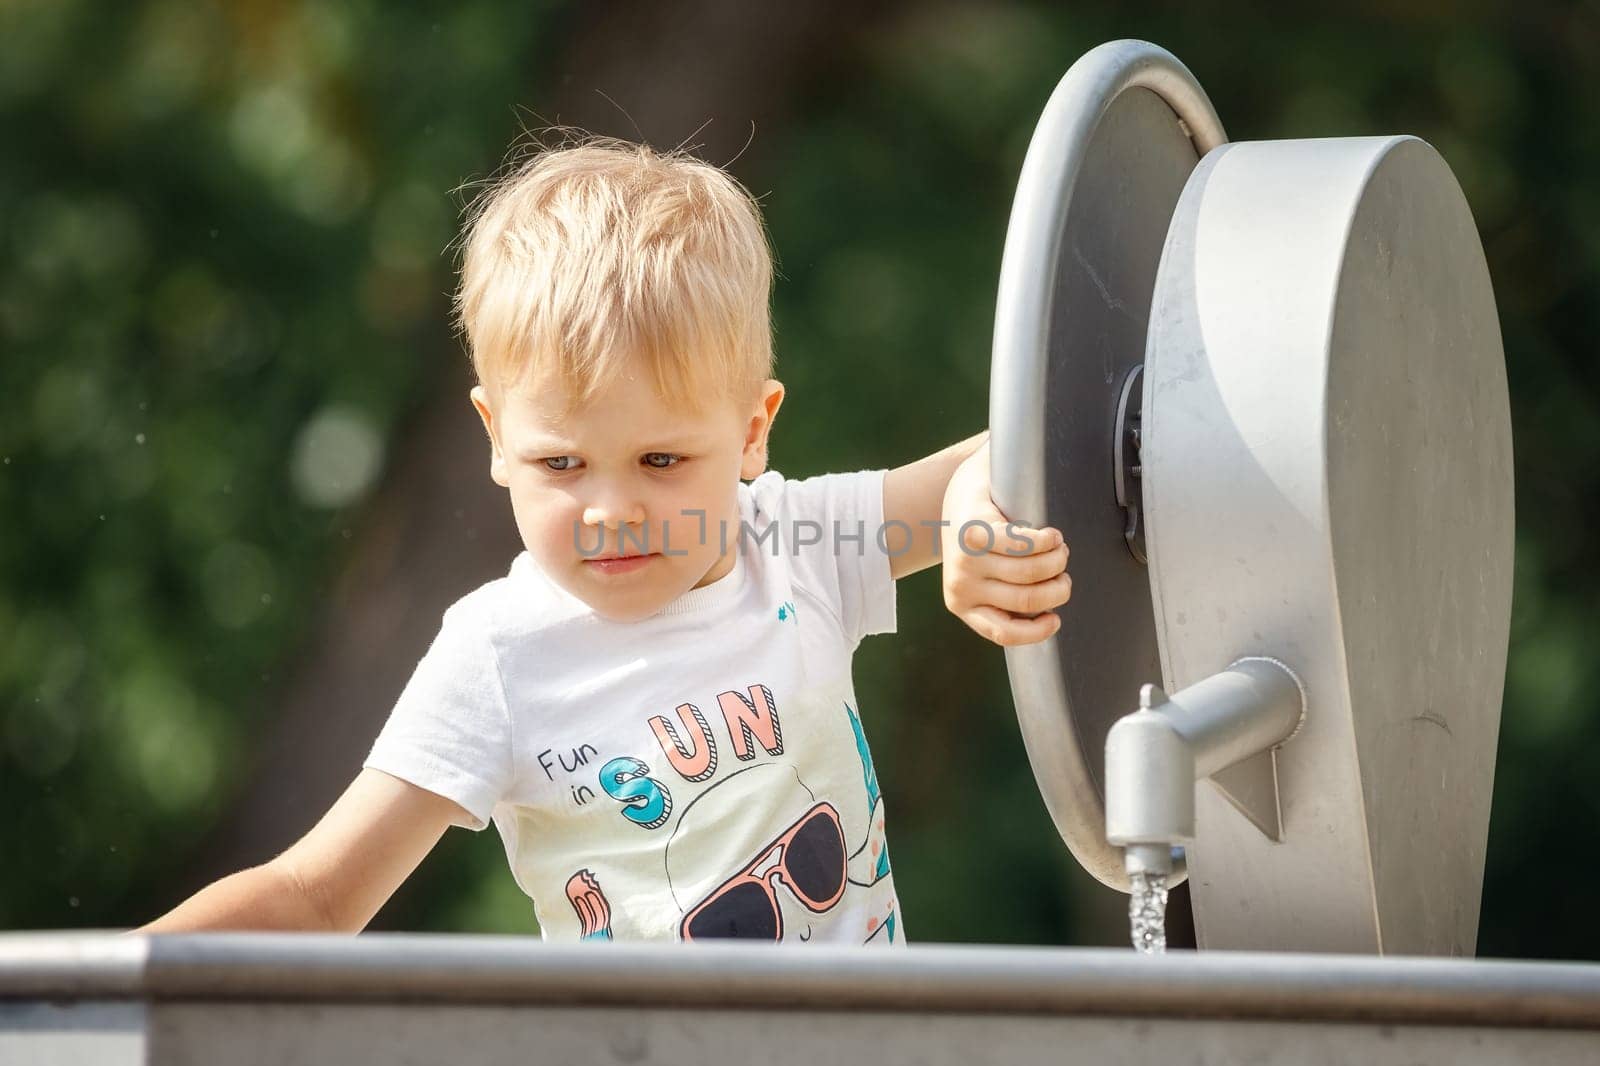 A happy little boy plays with a water tap in a city park. Special water equipment for children's games on a hot summer day outdoors by Lincikas